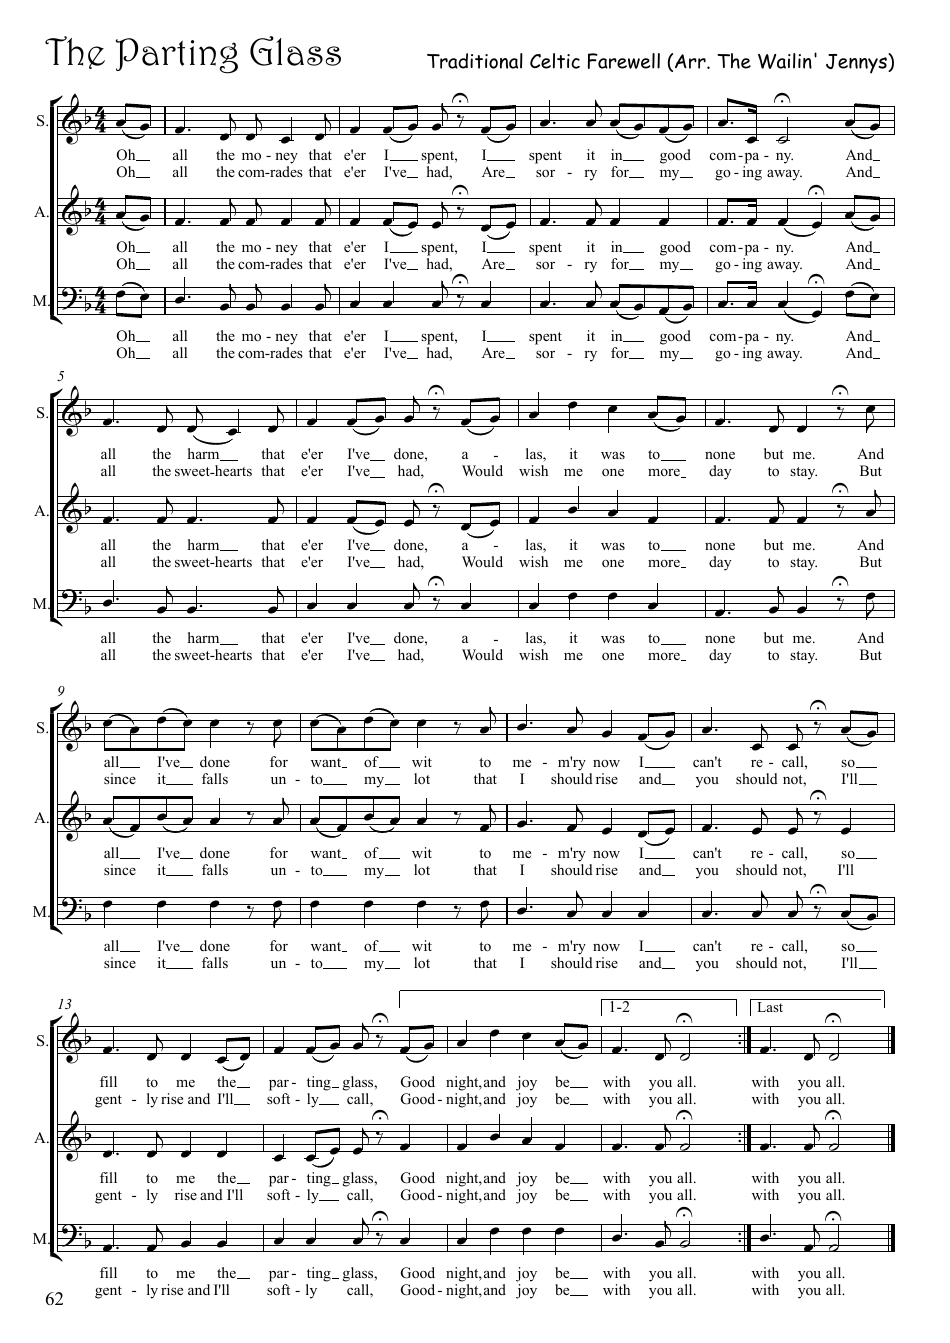 Traditional Celtic Farewell - The Parting Glass - Sheet Music Preview